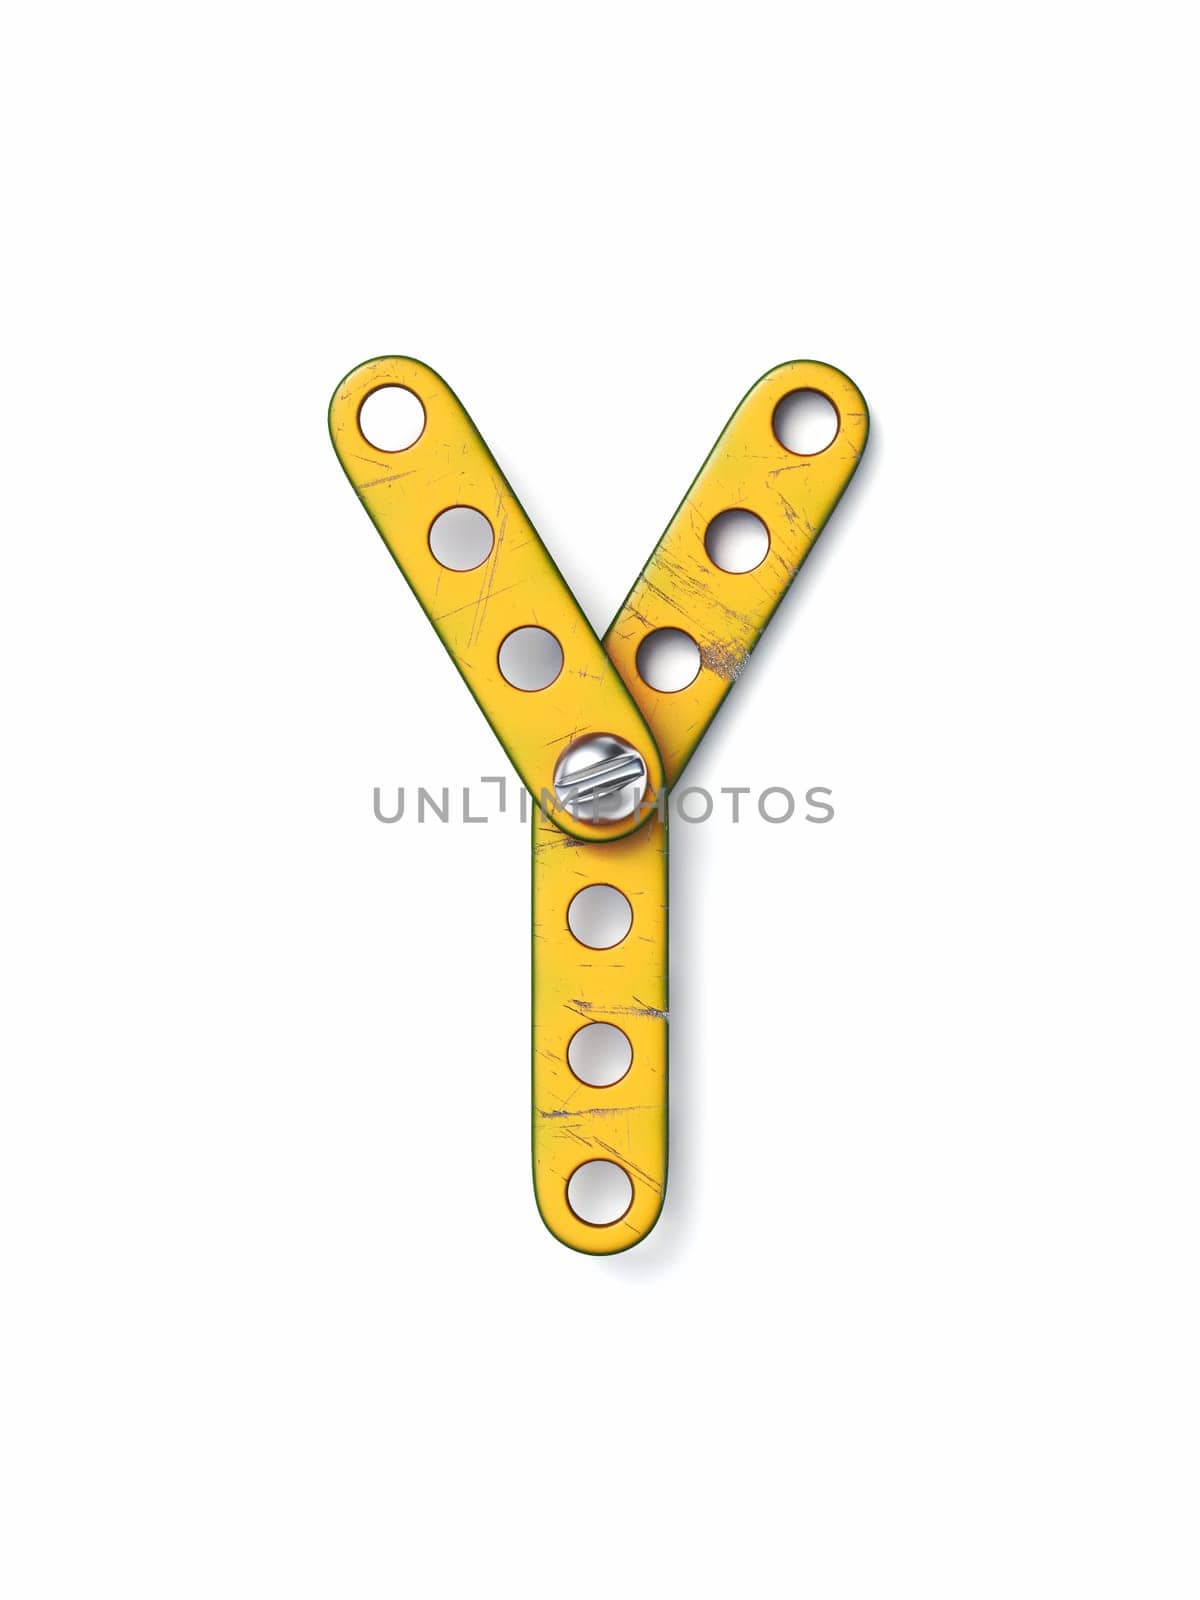 Aged yellow constructor font Letter Y 3D rendering illustration isolated on white background